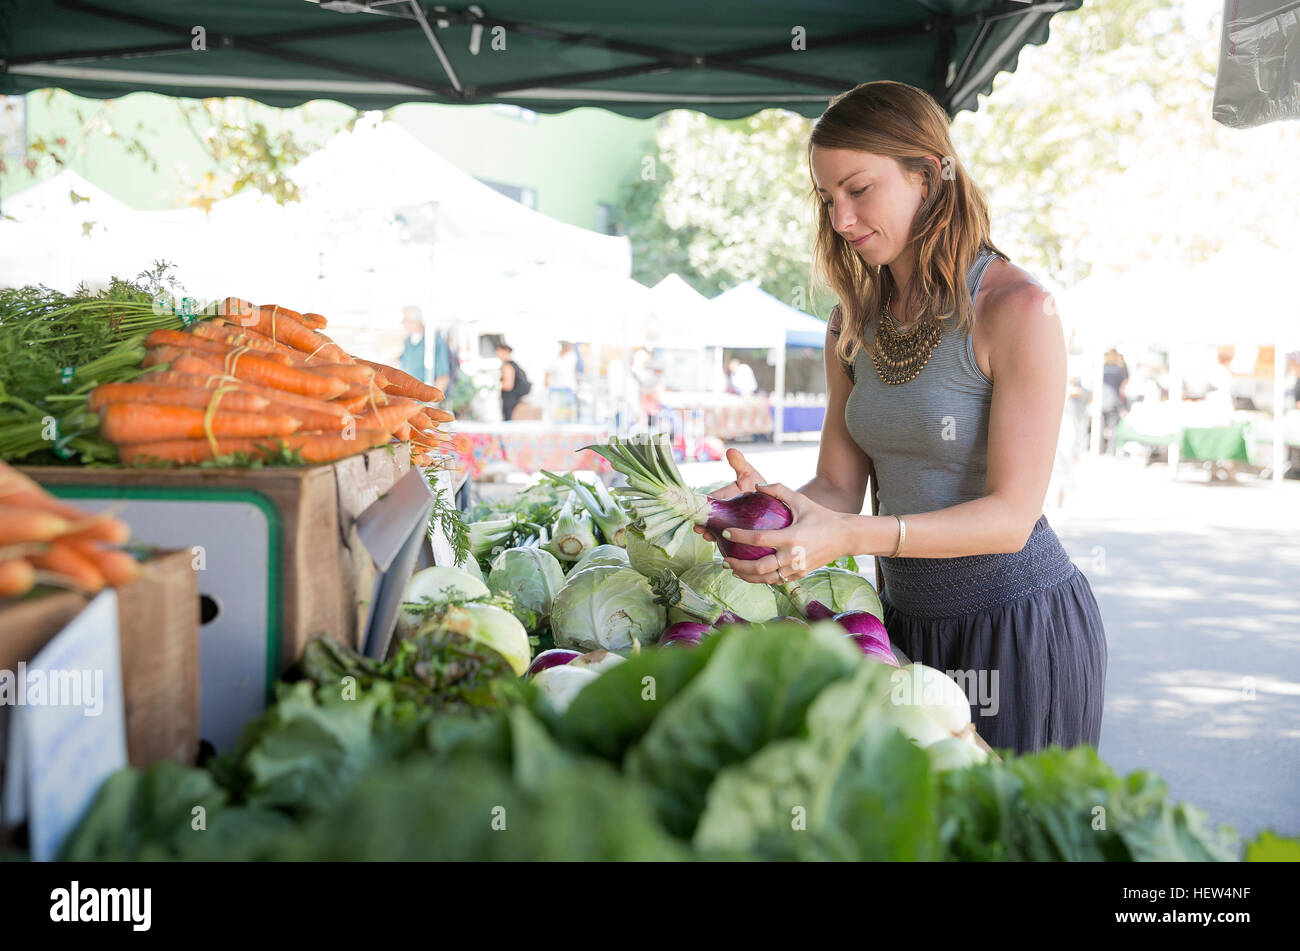 Woman at fruit and vegetable stall selecting red onions Stock Photo